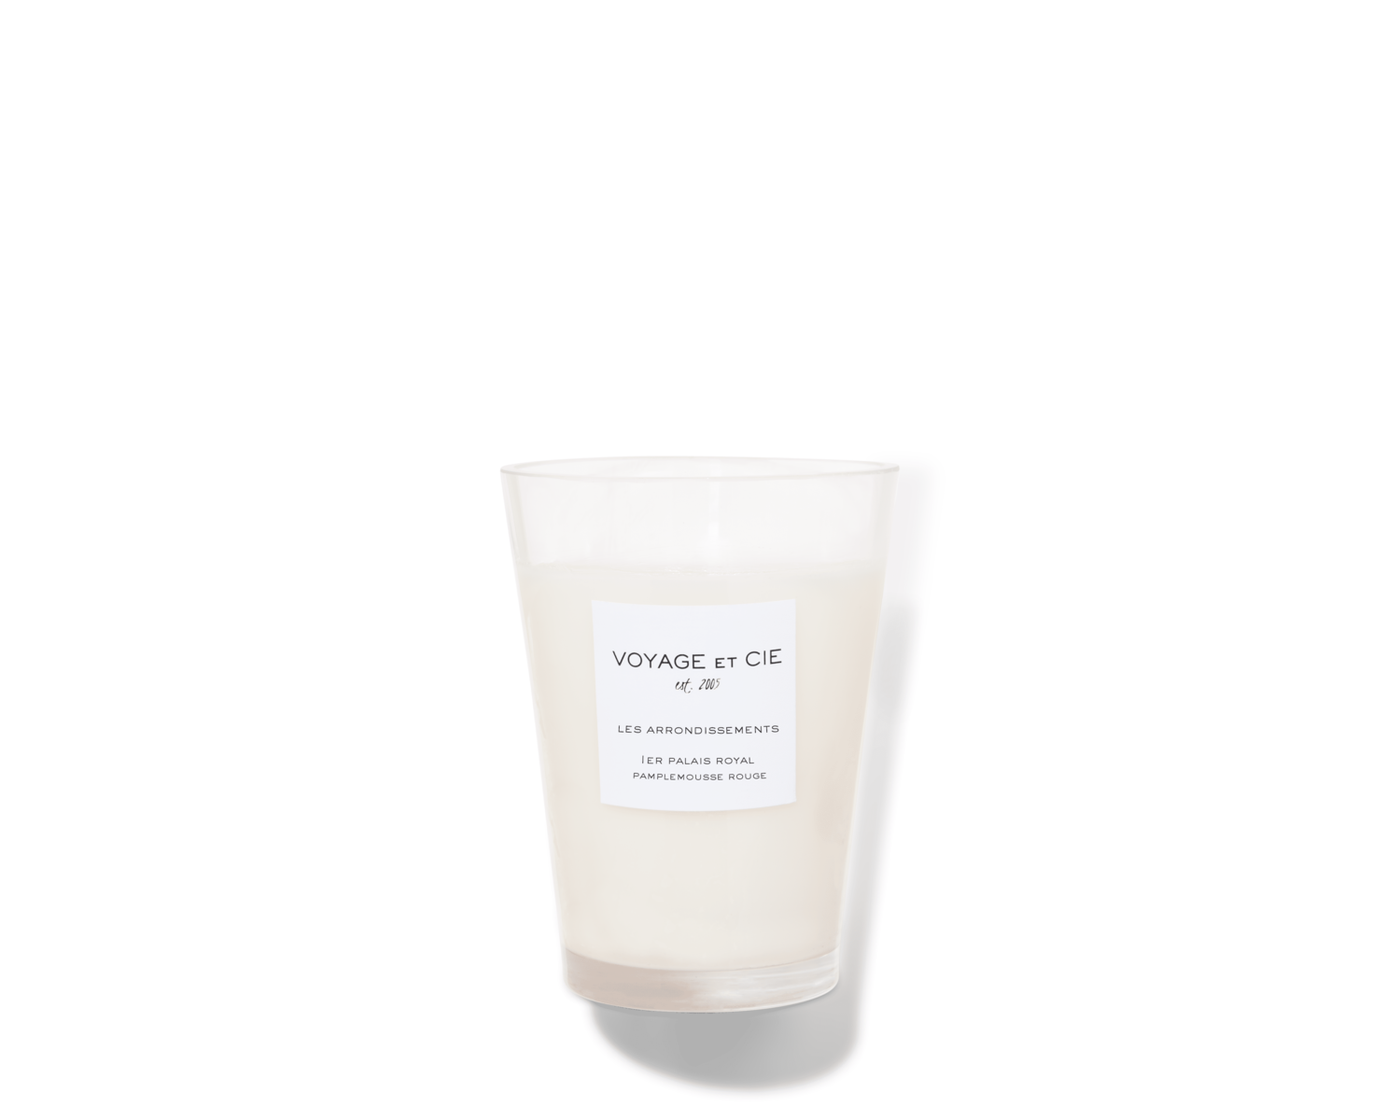 VOYAGE ET CIE CANDLE PAMPLEMOUSSE ROUGE (Available in 5 Sizes)